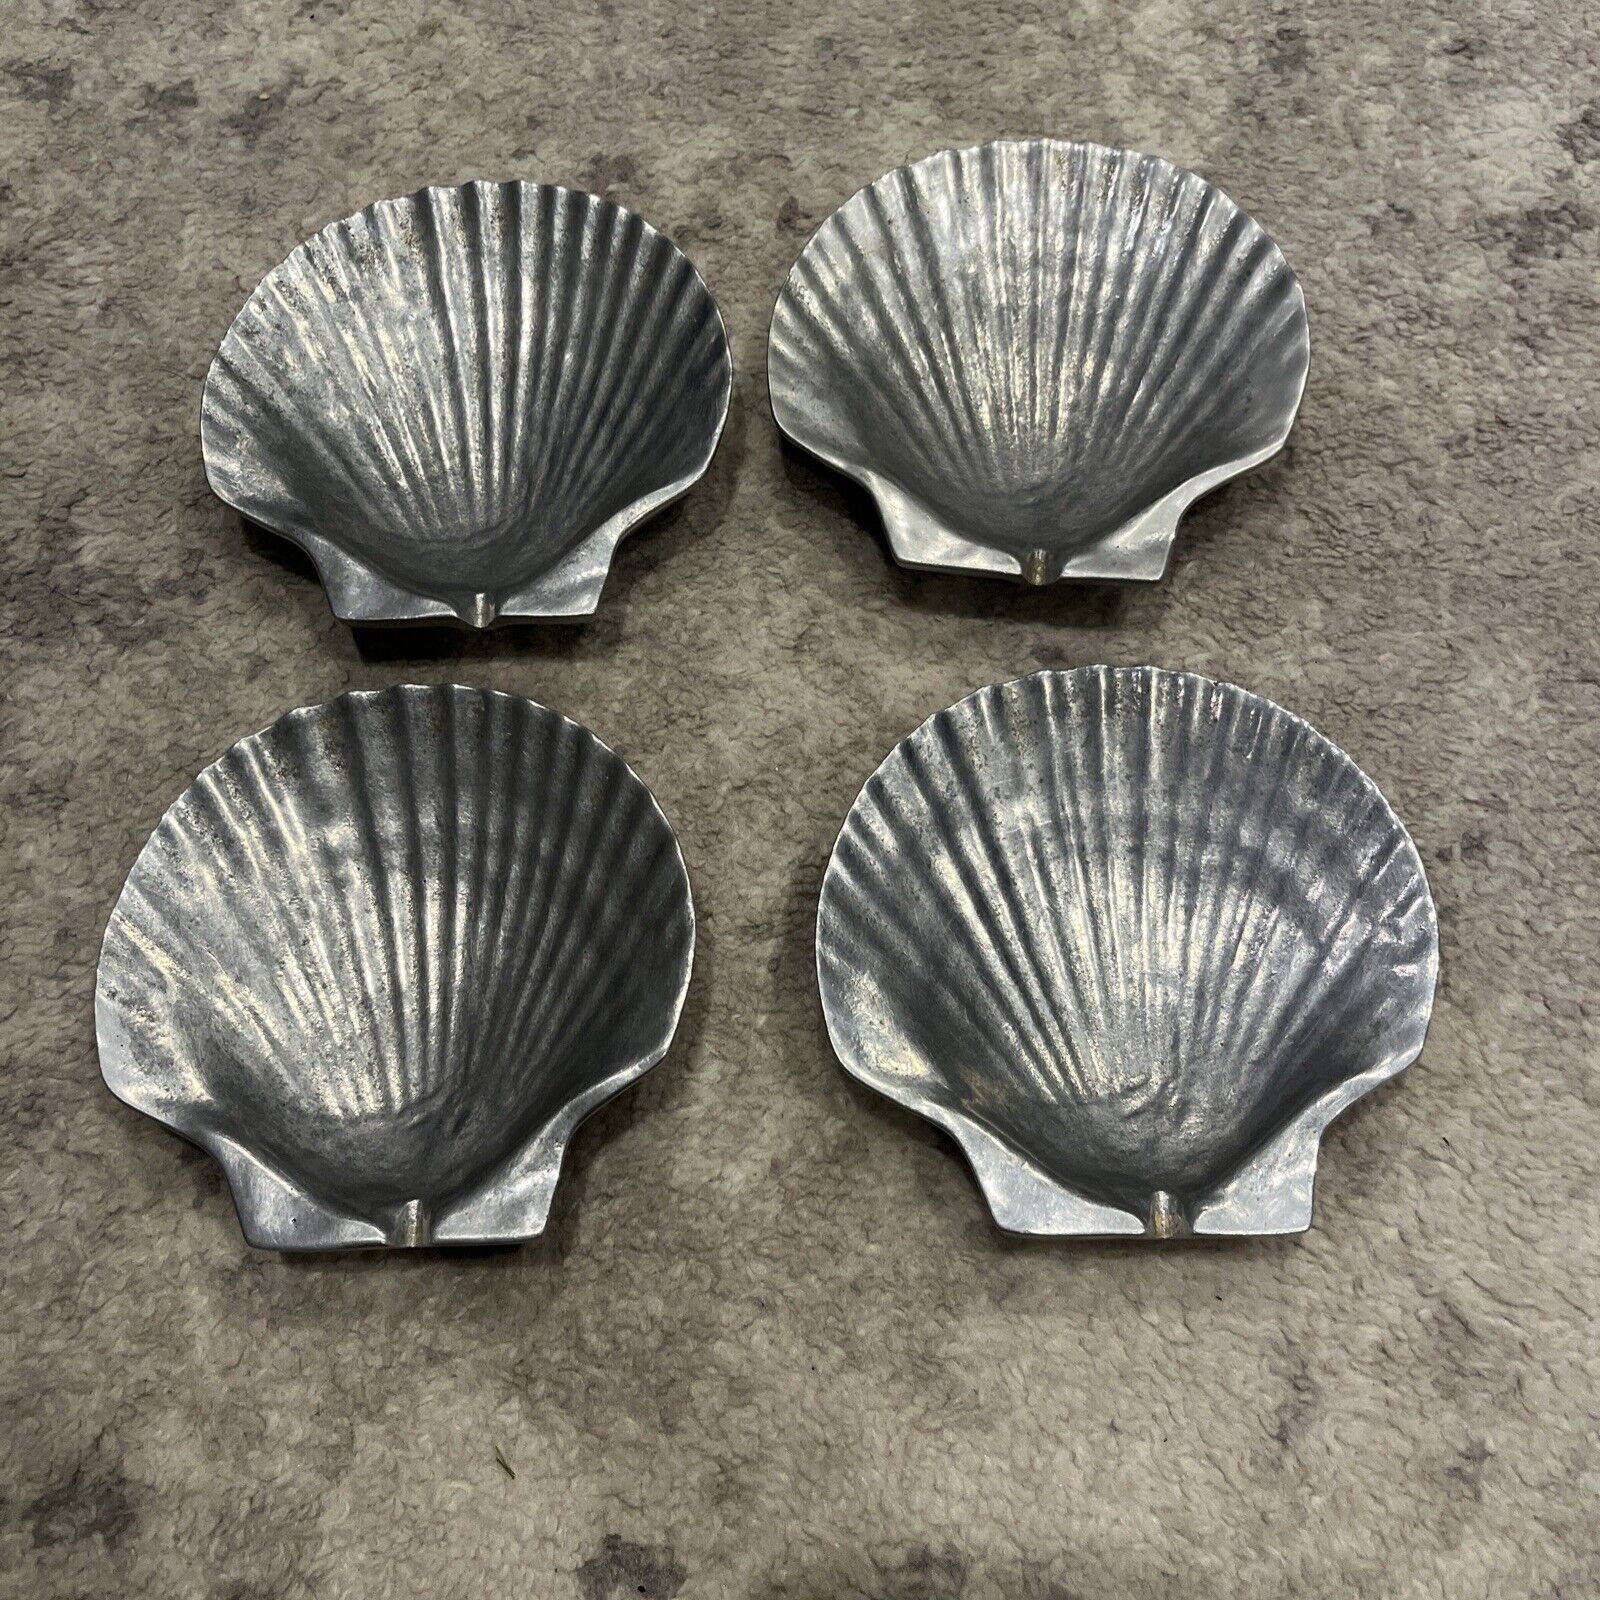 1960’s Vintage Wilton Pewter Seashell Tinker Dishes Saucers Set Of 4 Silver